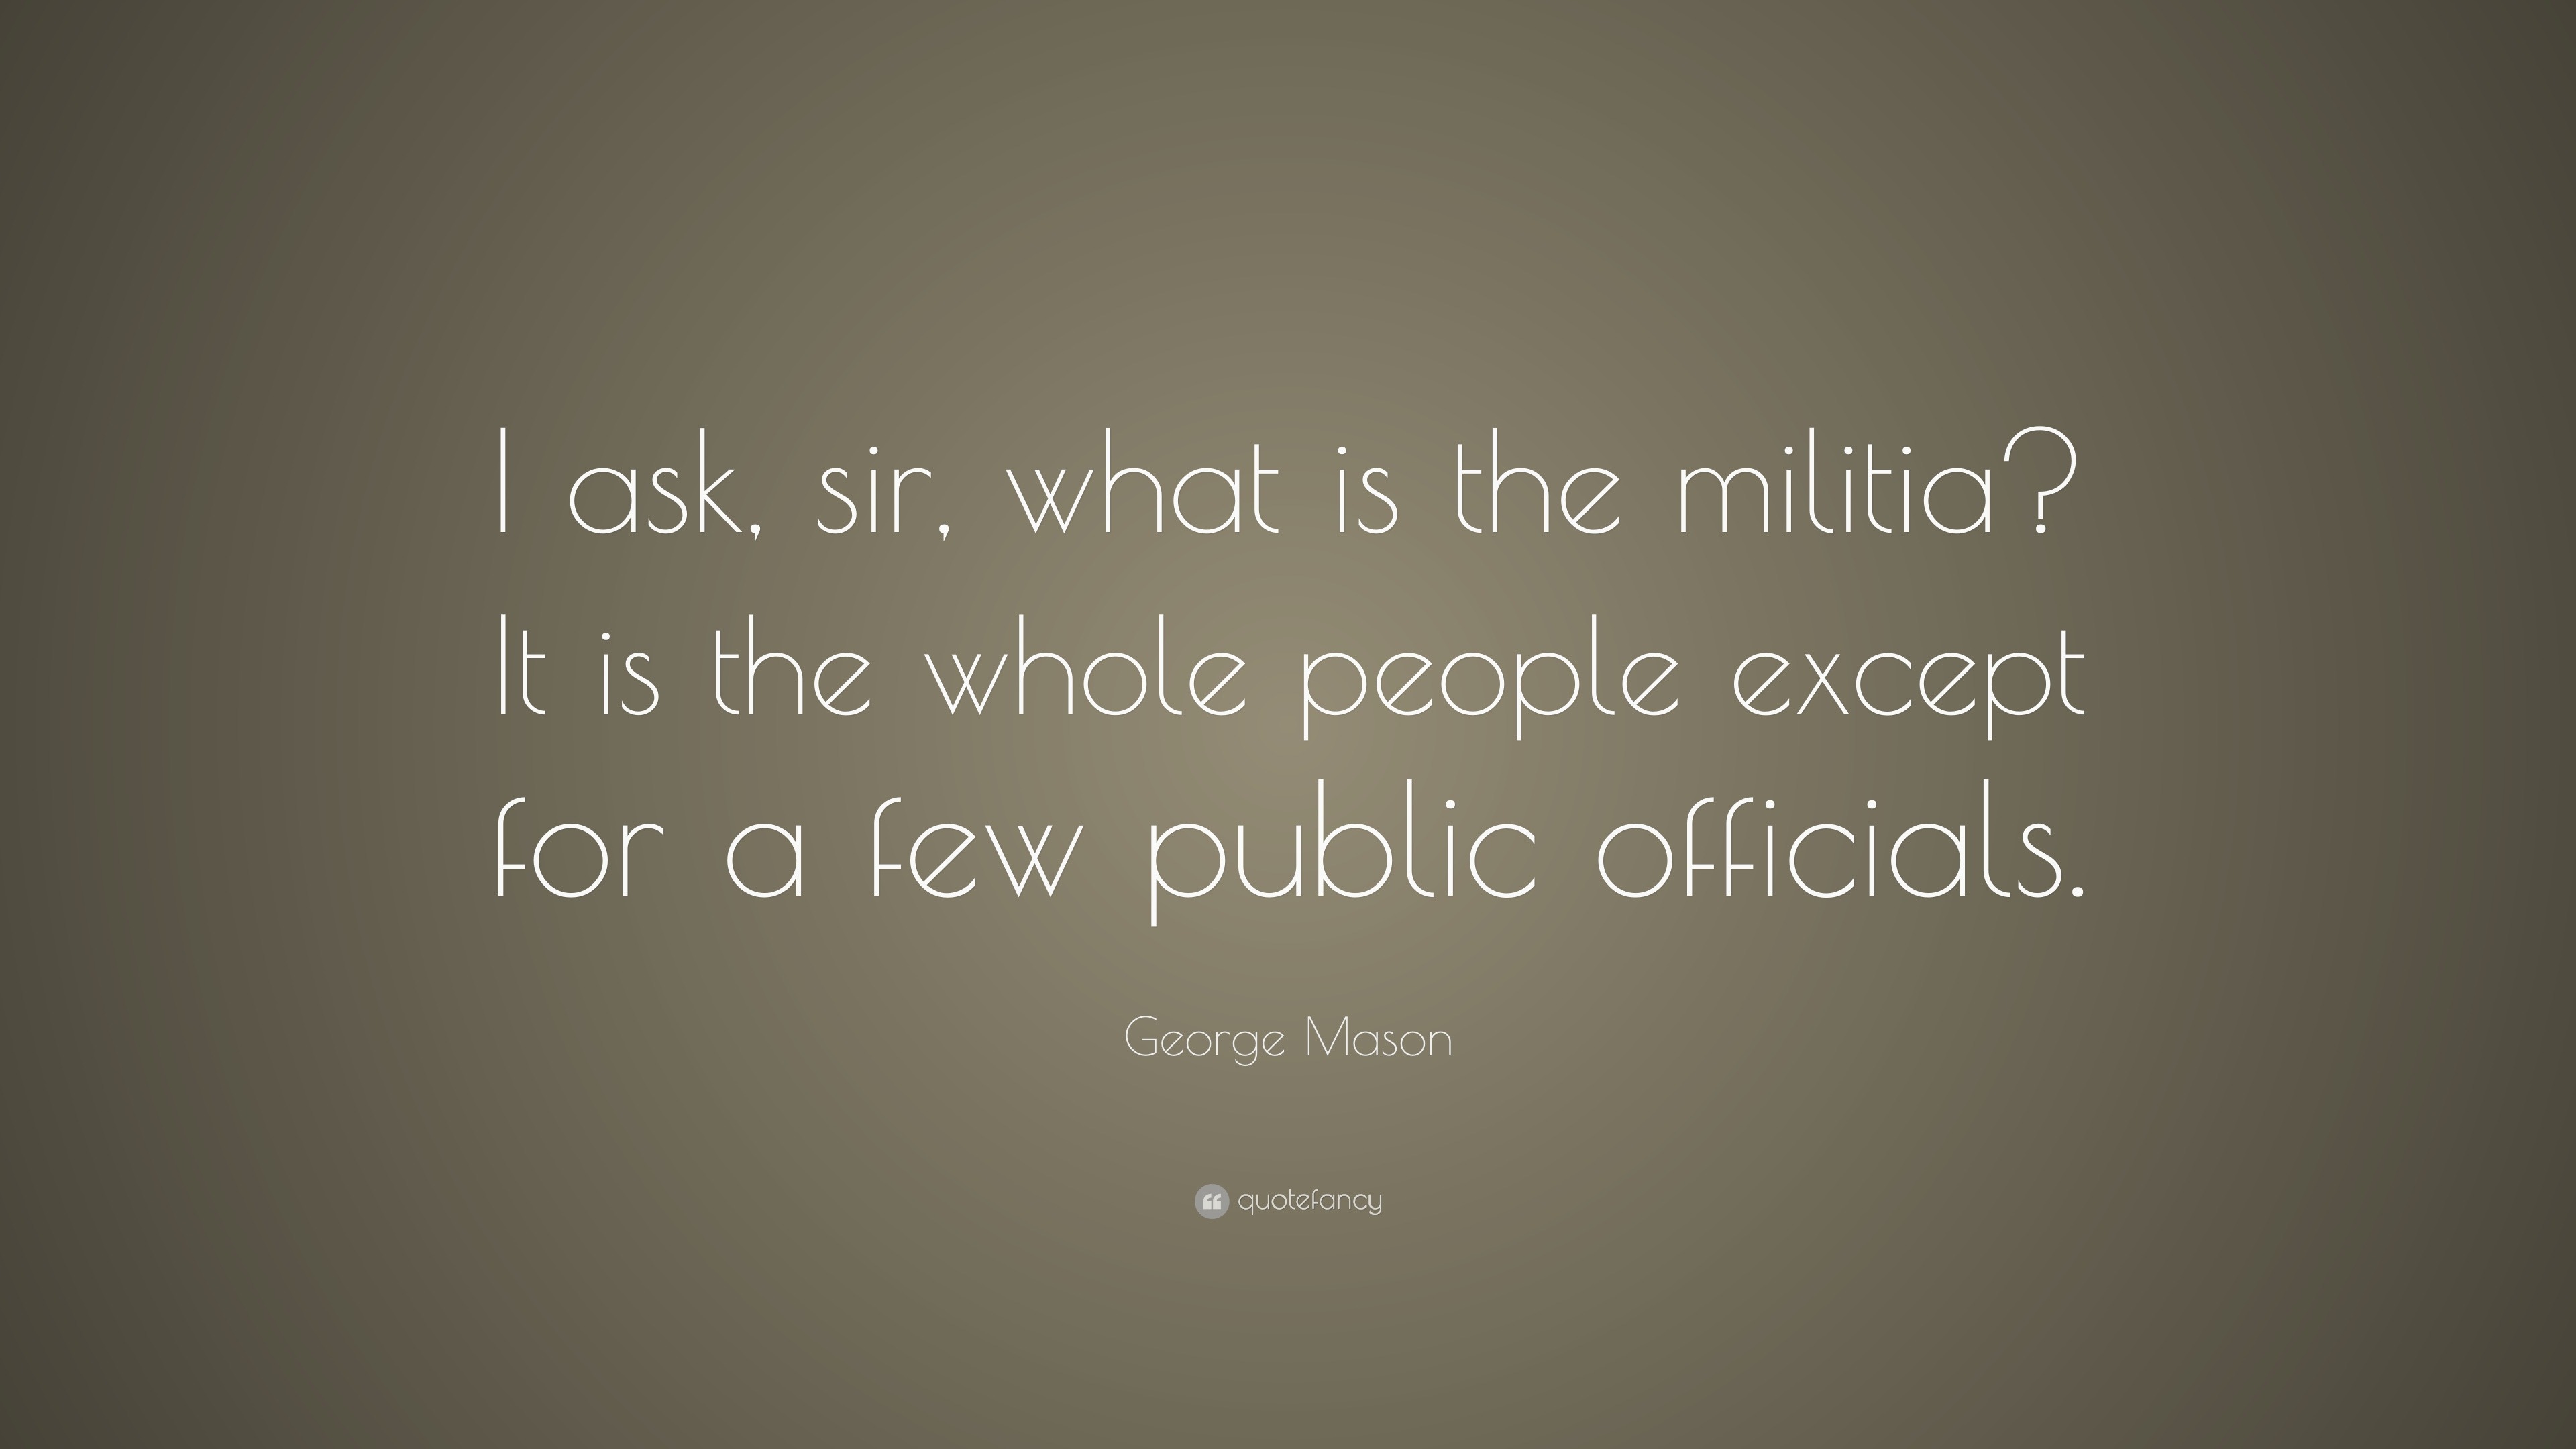 George Mason Quote: “I ask, sir, what is the militia? It is the whole